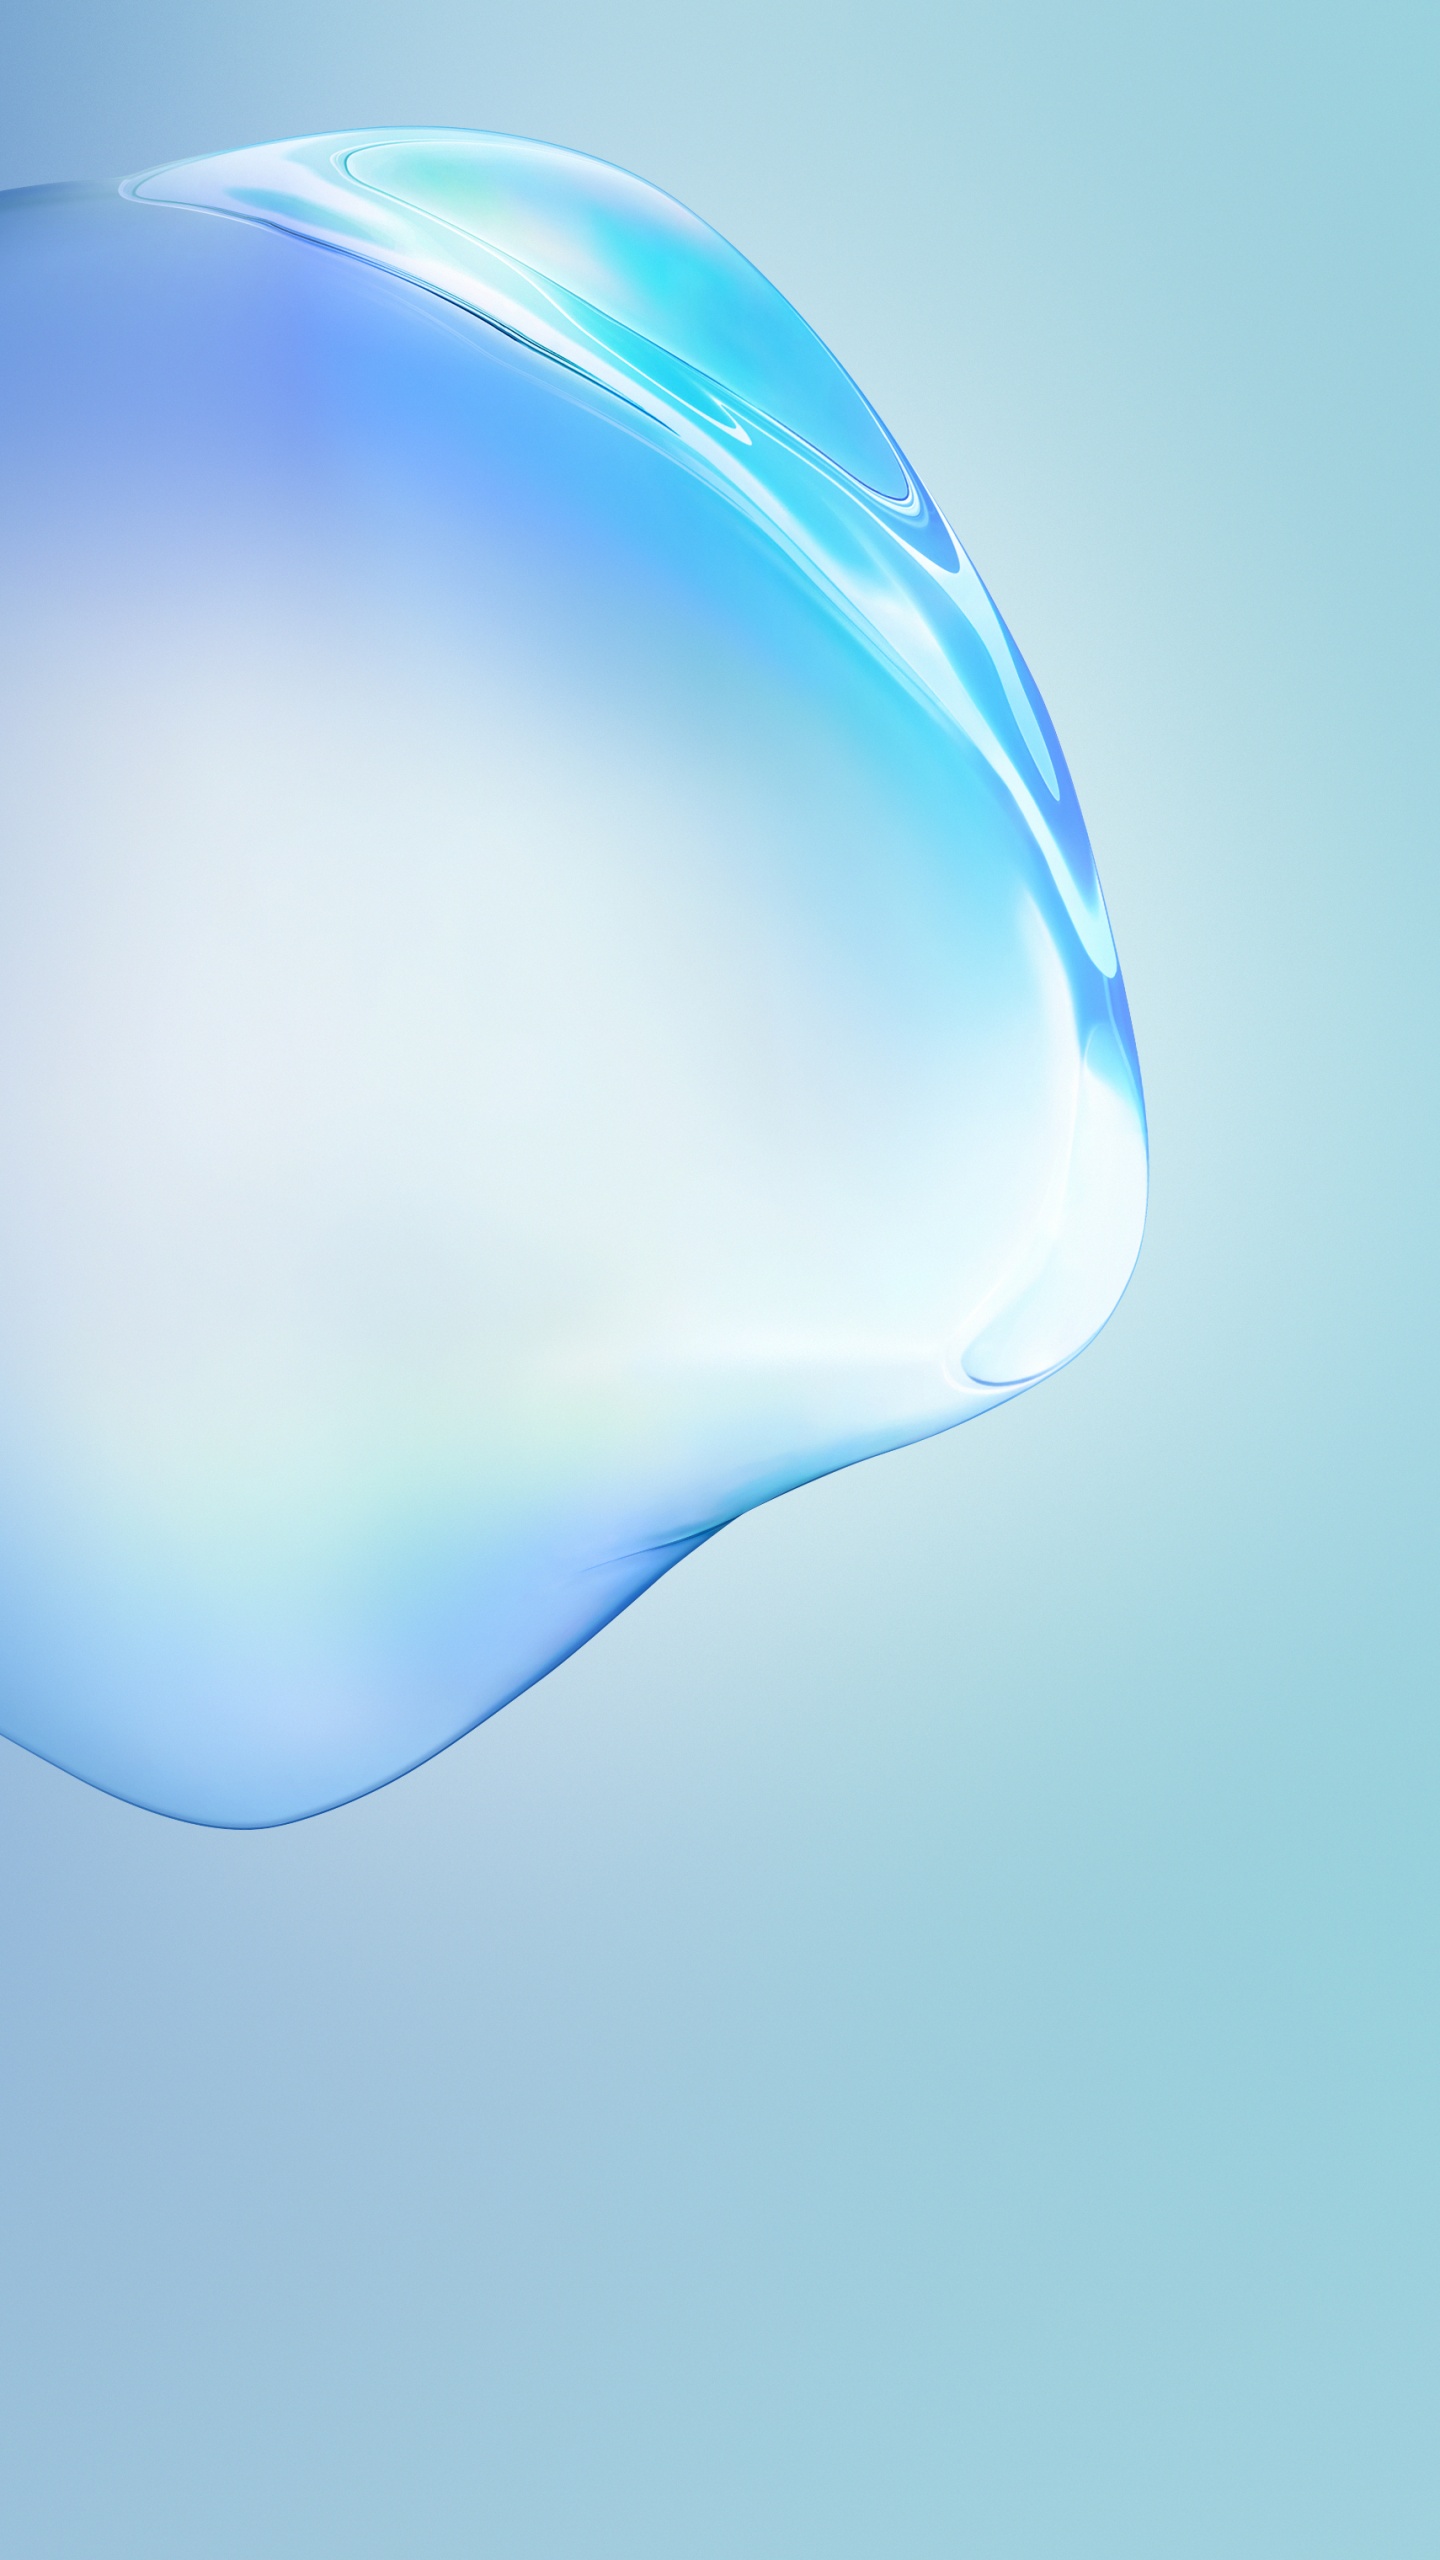 Samsung Galaxy Note10 Wallpaper 4K, Bubble, Blue, Stock, Abstract, #730